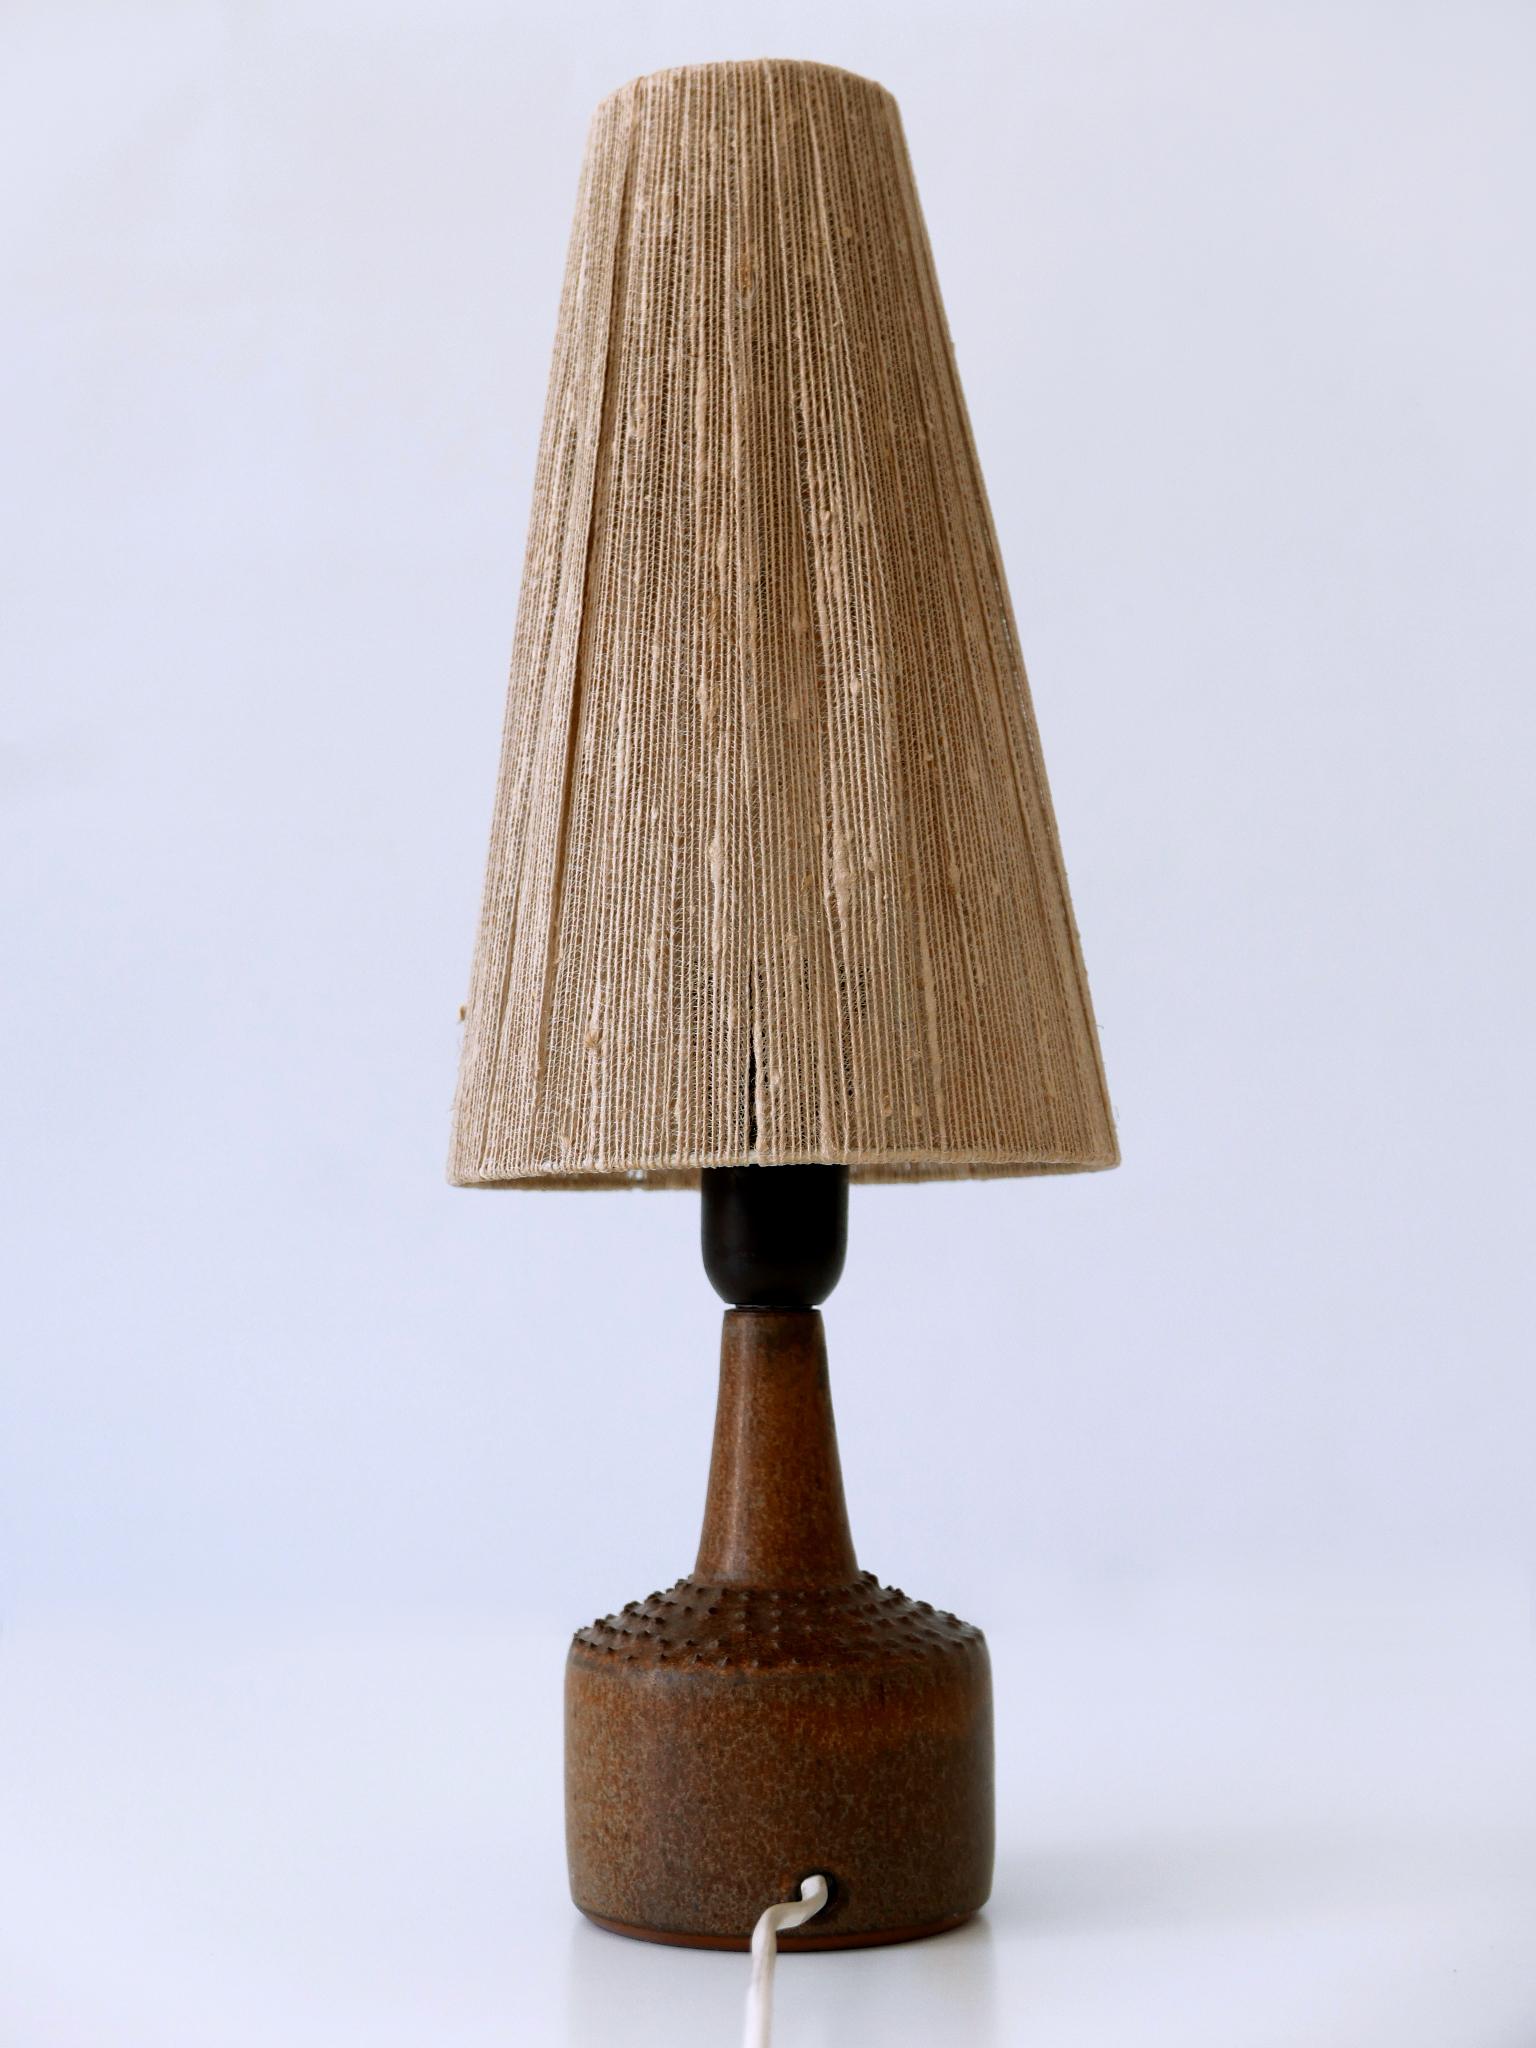 Rare Mid-Century Glazed Stoneware Table Lamp by Rolf Palm for Mölle Sweden 1962 2